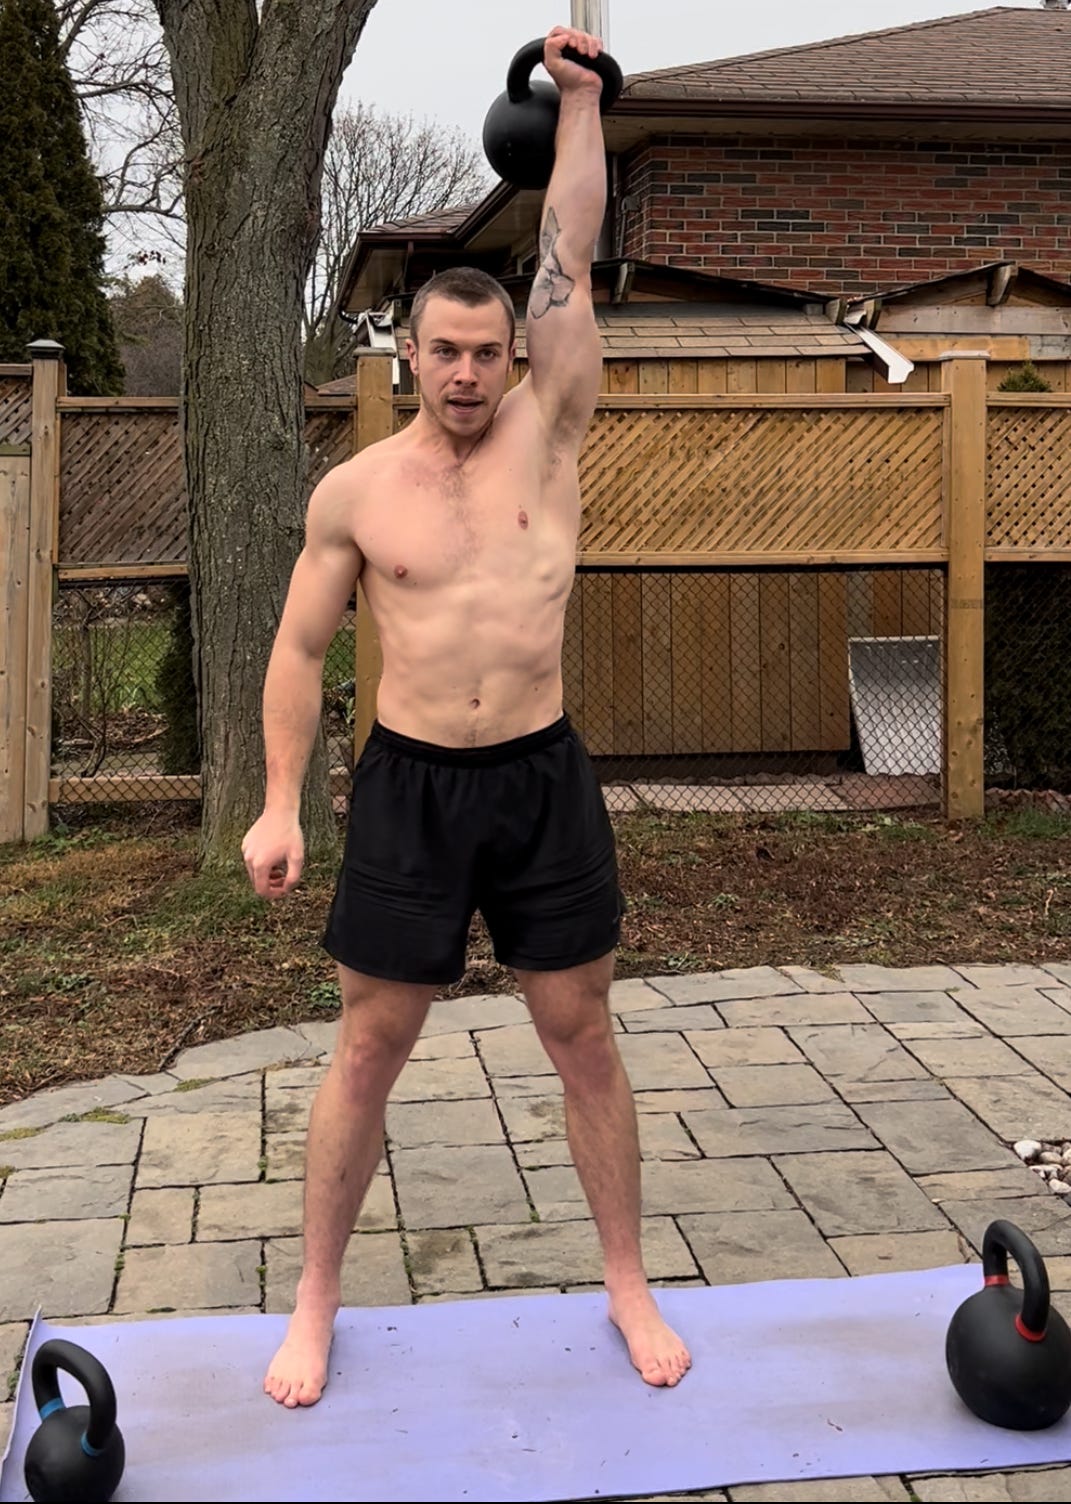 Single-arm overhead pressing a 24kg/53lb kettlebell (KB OHP) for 3 sets of 10 reps per side. January 2022.